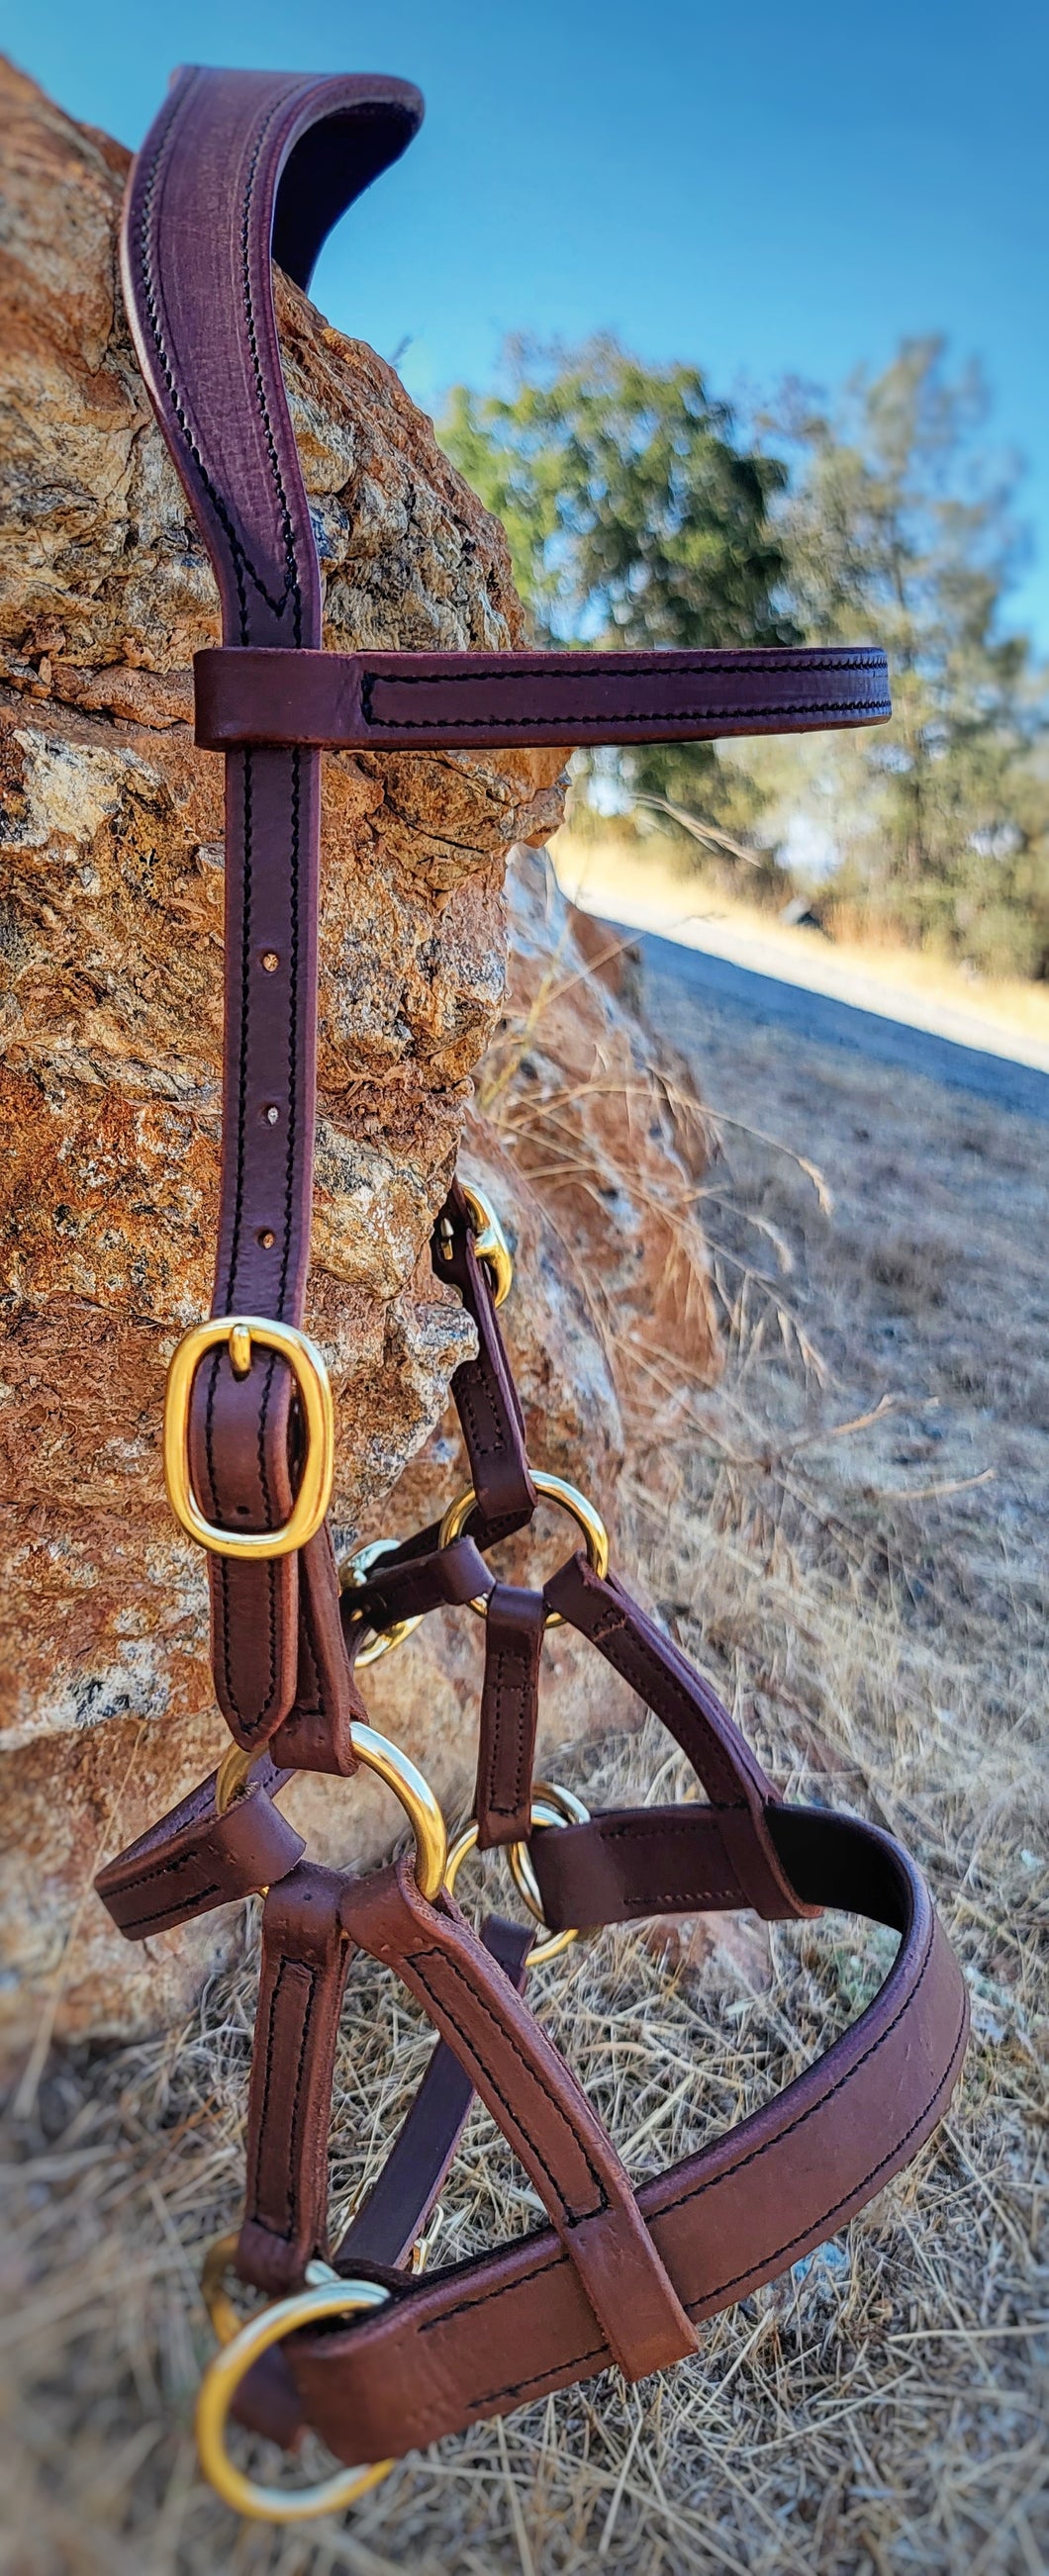 Traditional bitless sidepull bridle